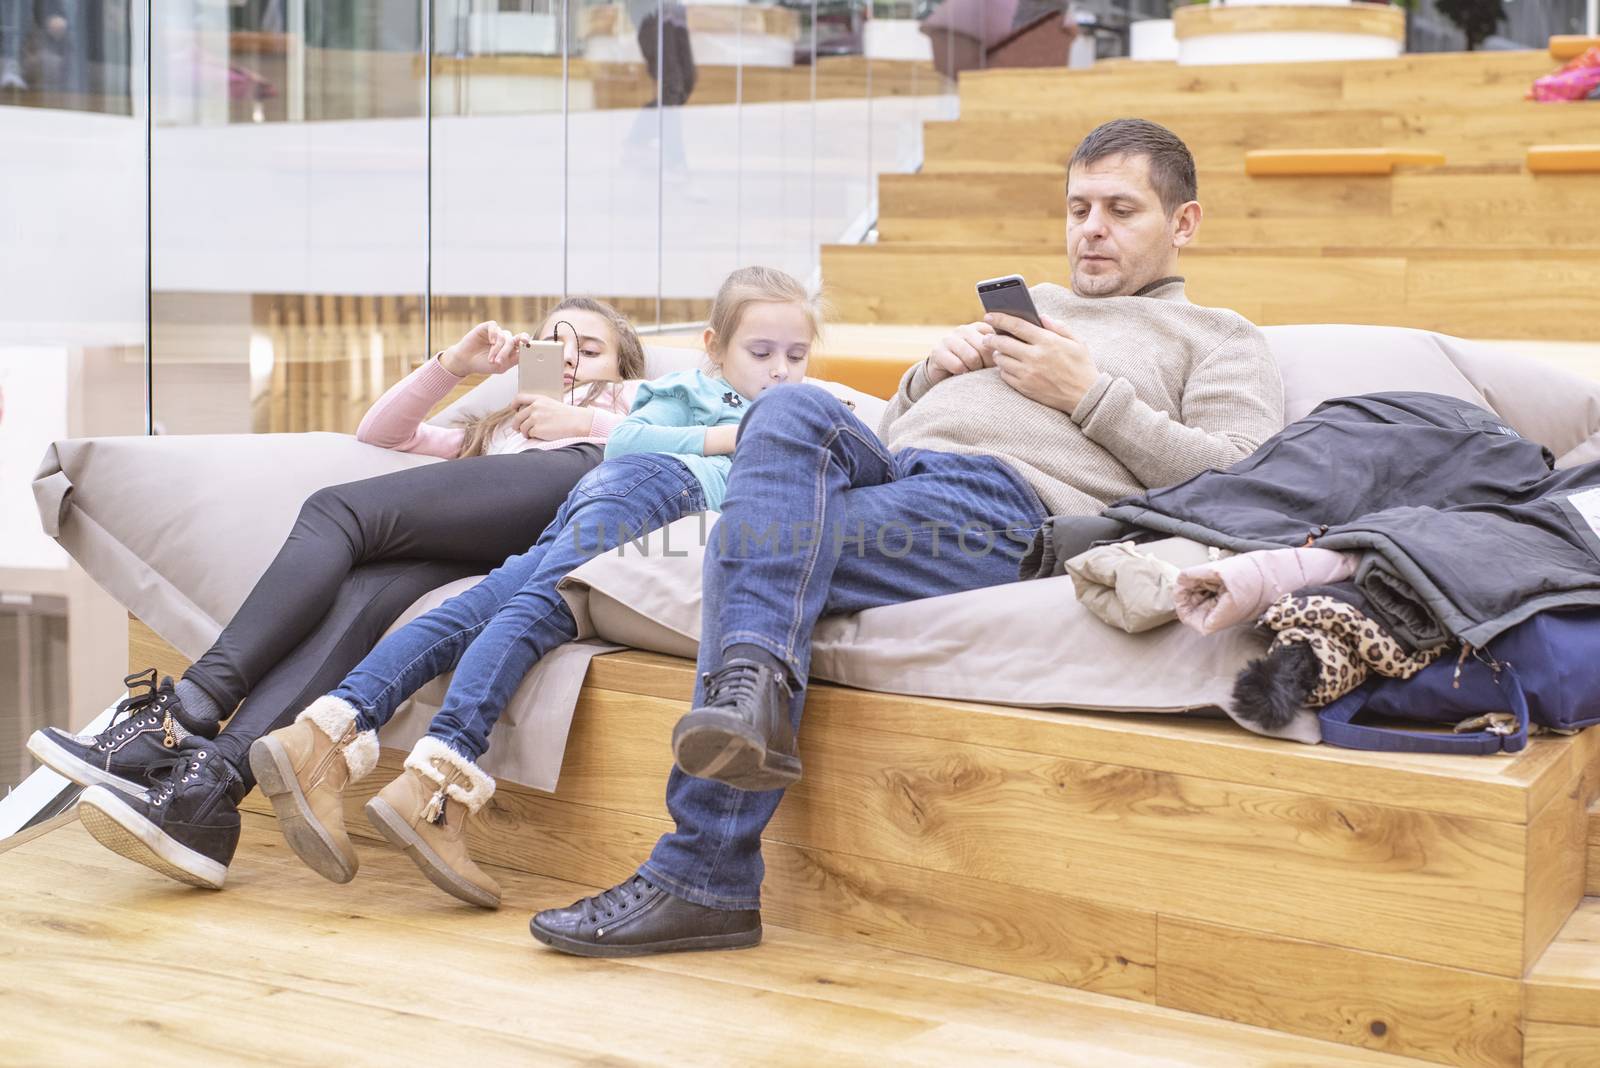 The father is resting with the kids in the store.Father with children is waiting on the easy chairs in the store.